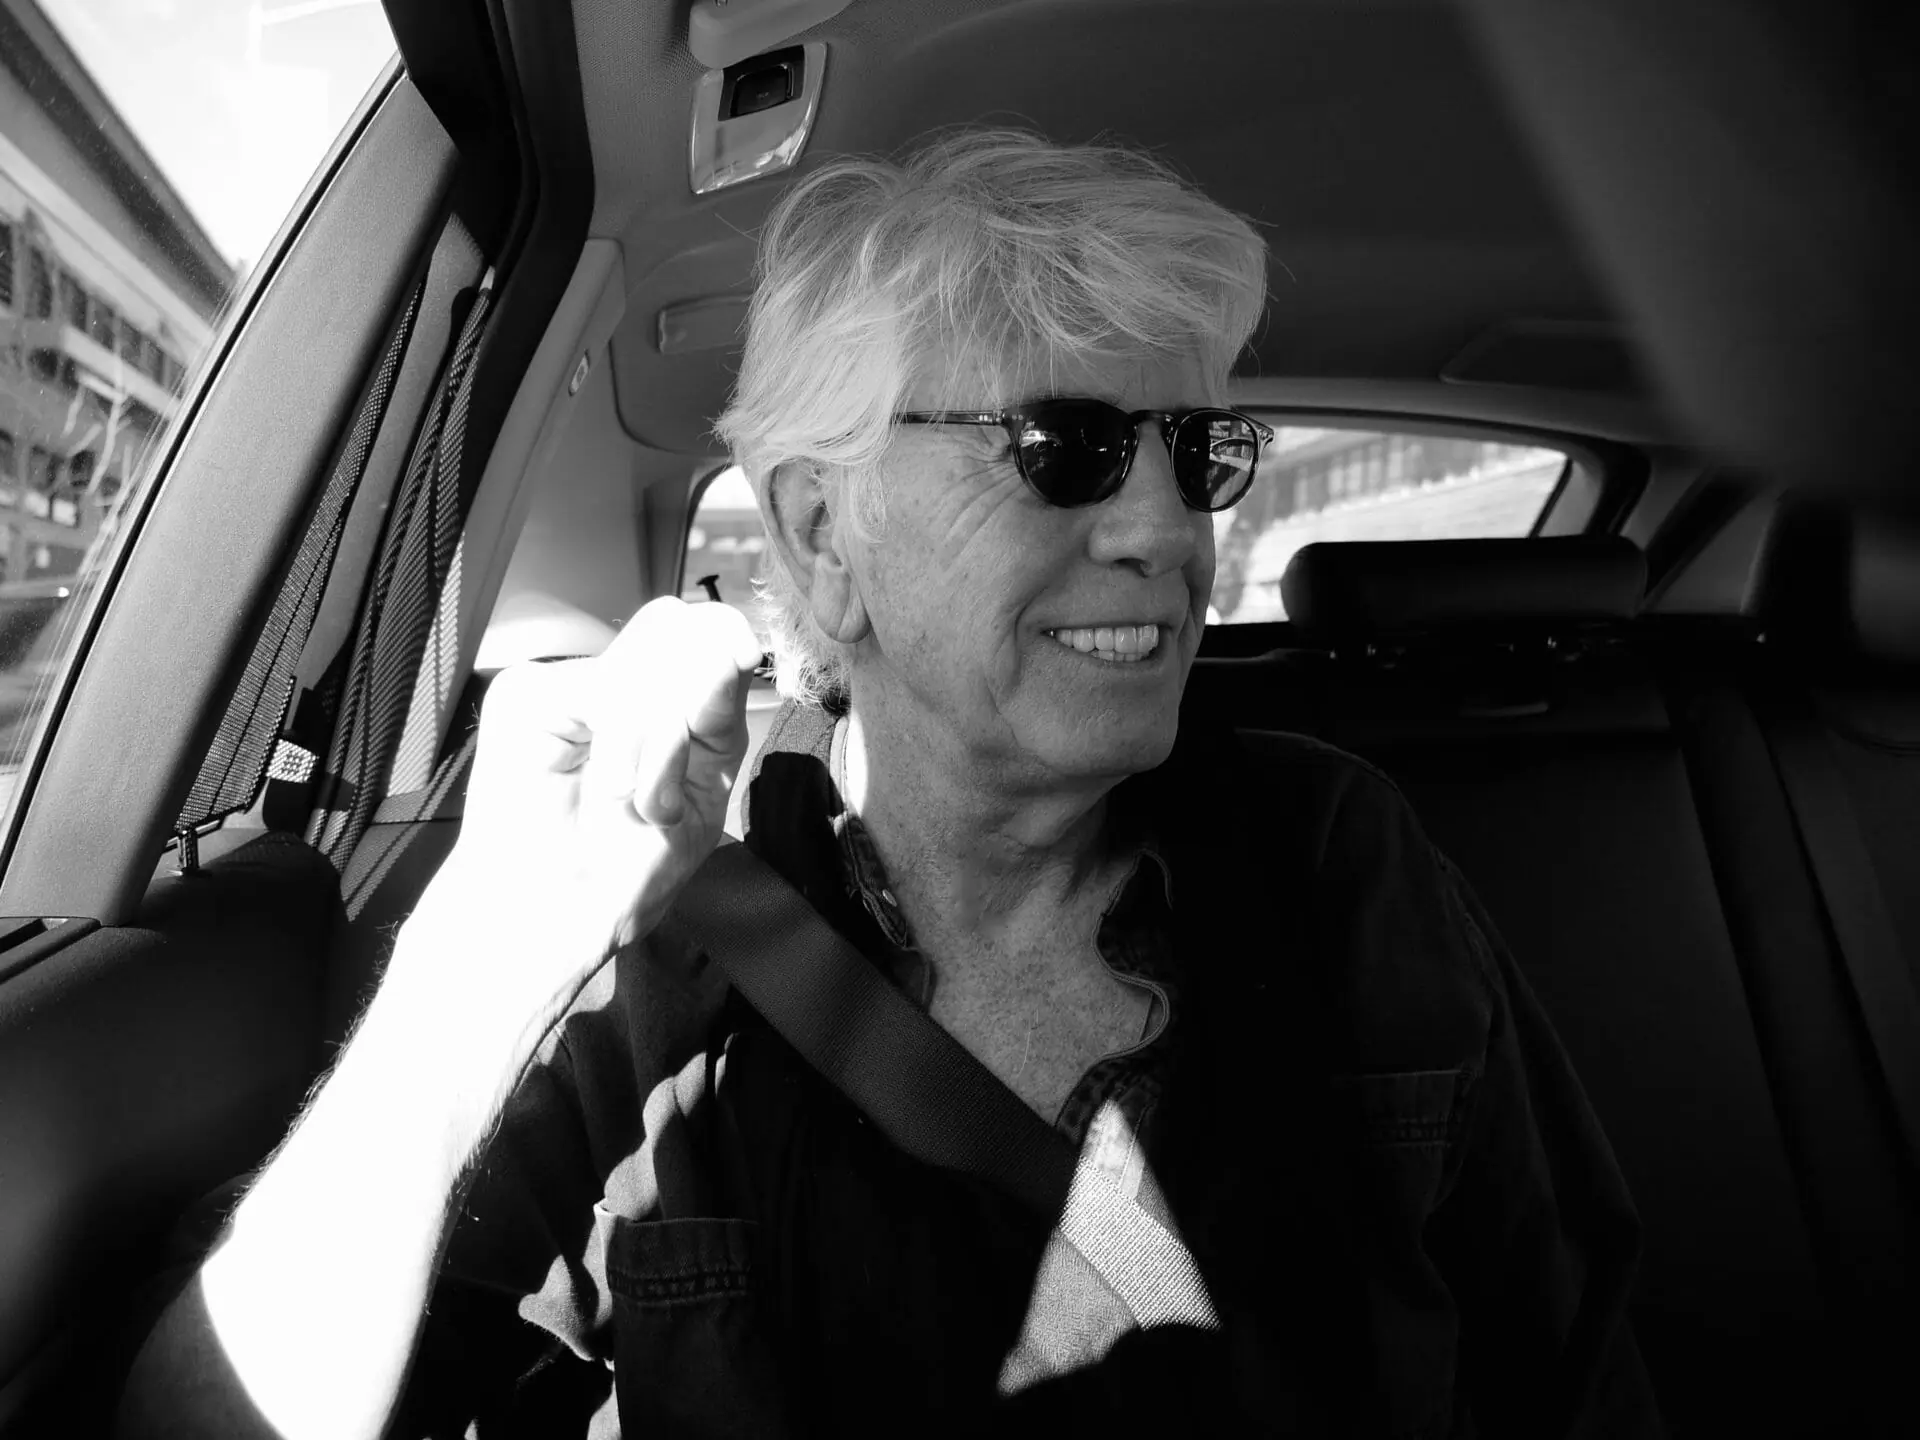 Graham Nash to Deliver First New Studio Album in Seven Years, Debuts Track “Right Now”